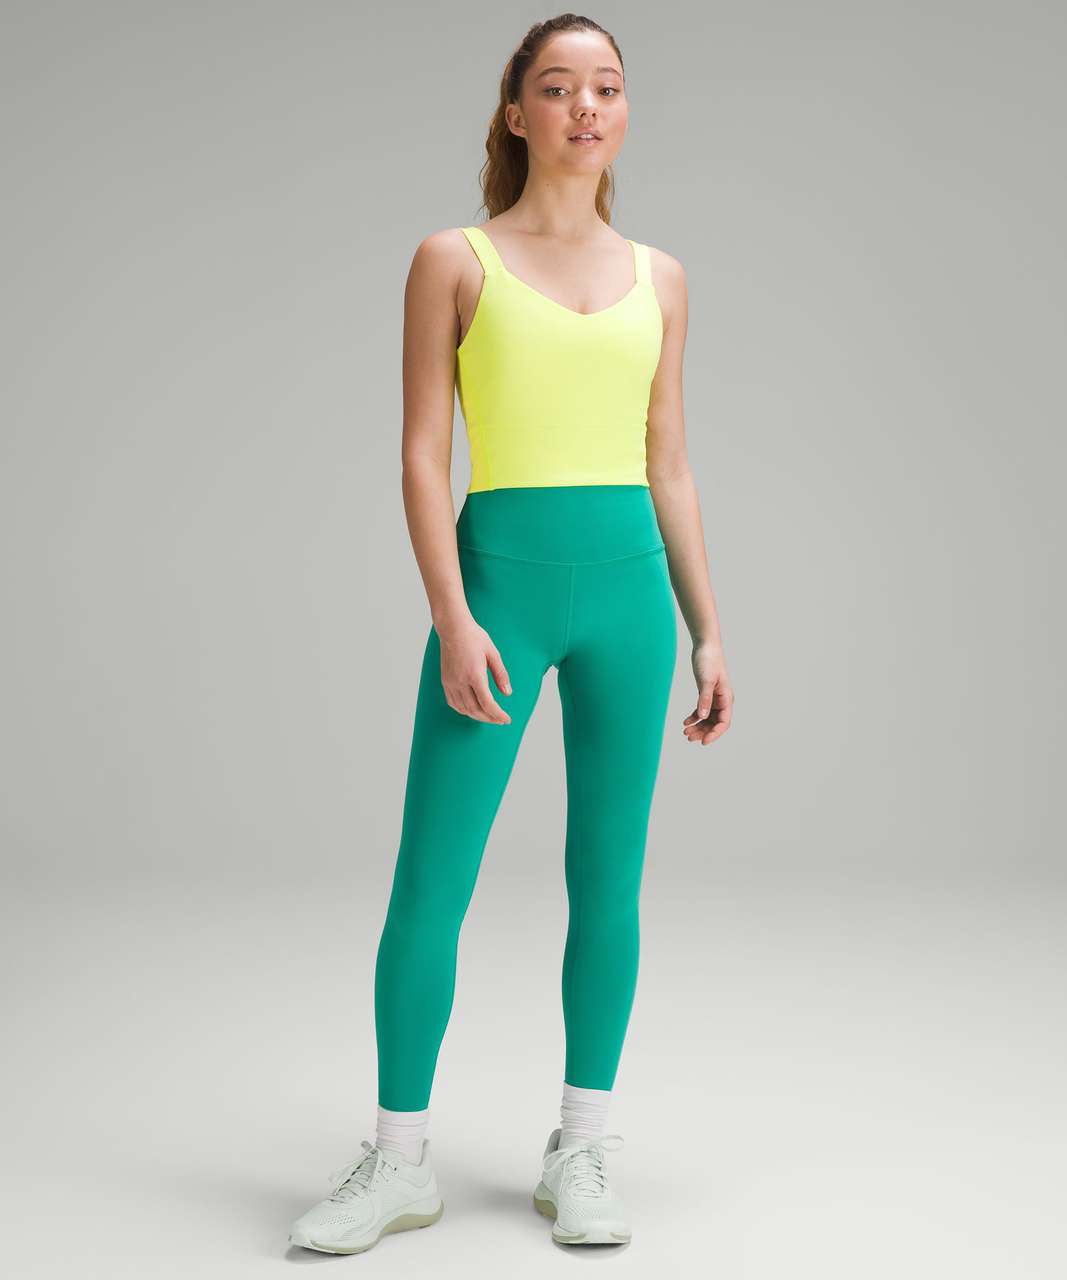 Size 12 girl. Wunder Train and Align tank both in 12. Size 16/18 straight  size with a 38/40D. Meh : r/lululemon